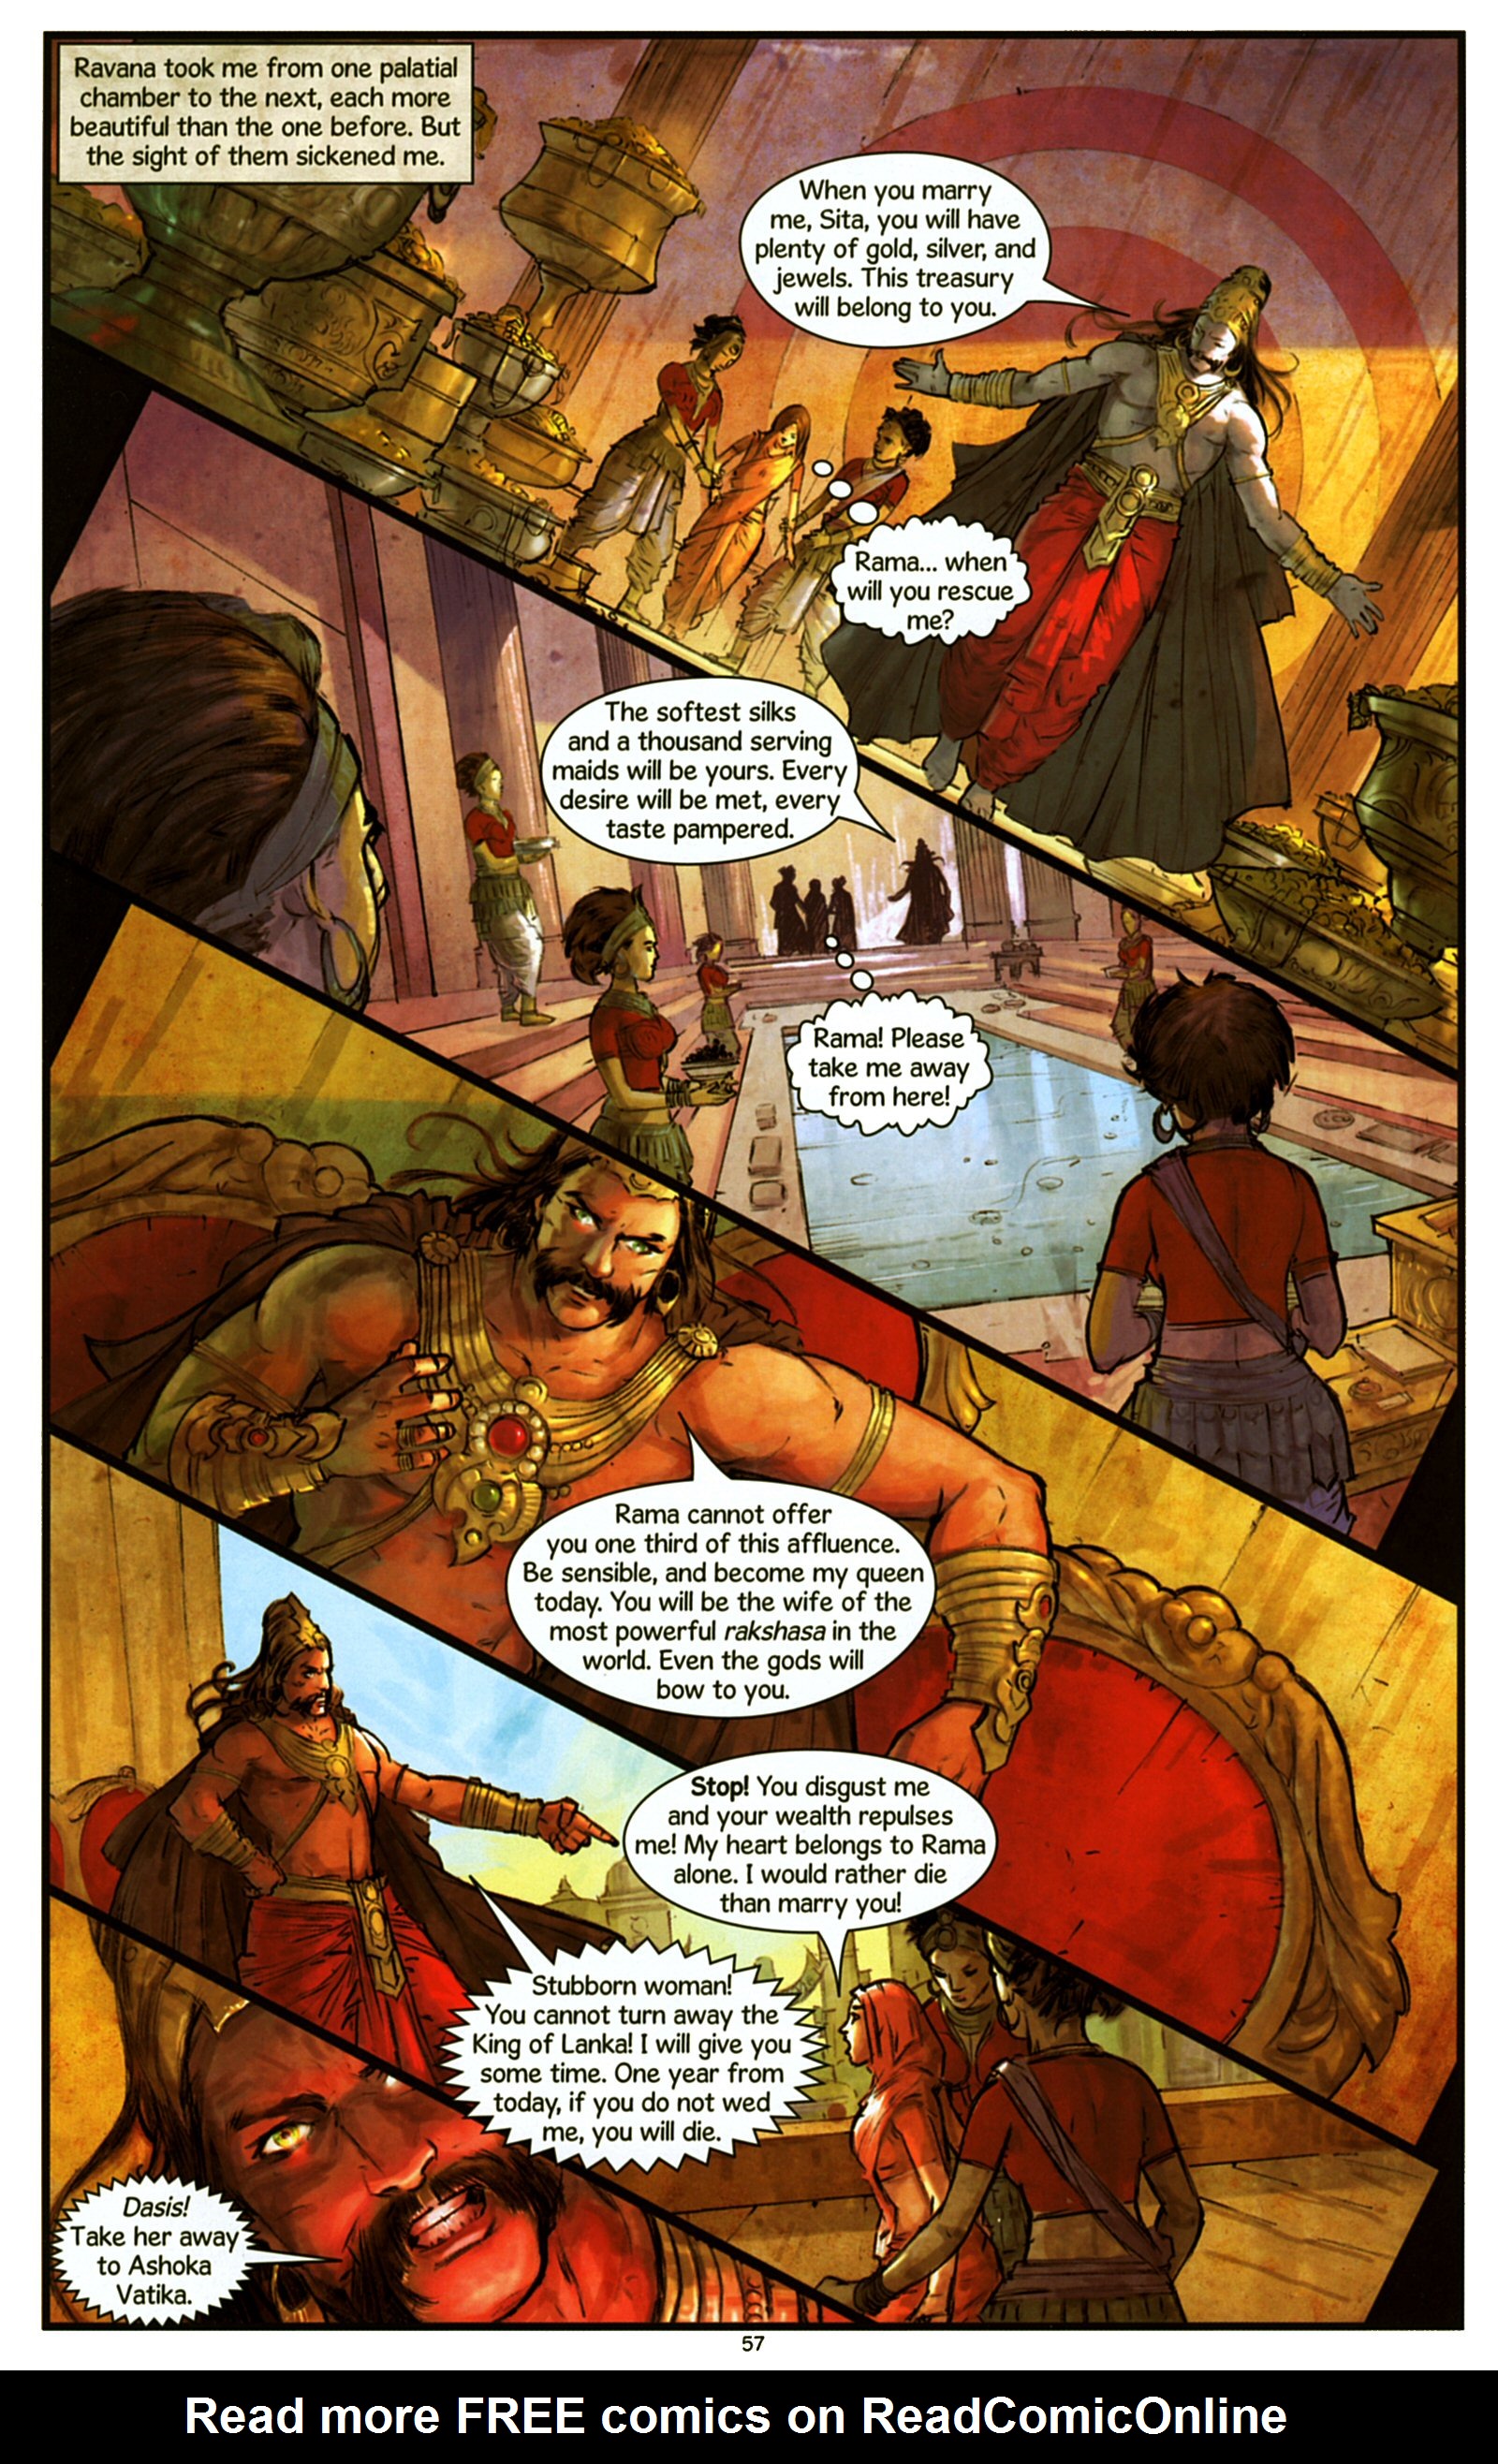 Read online Sita Daughter of the Earth comic -  Issue # TPB - 61